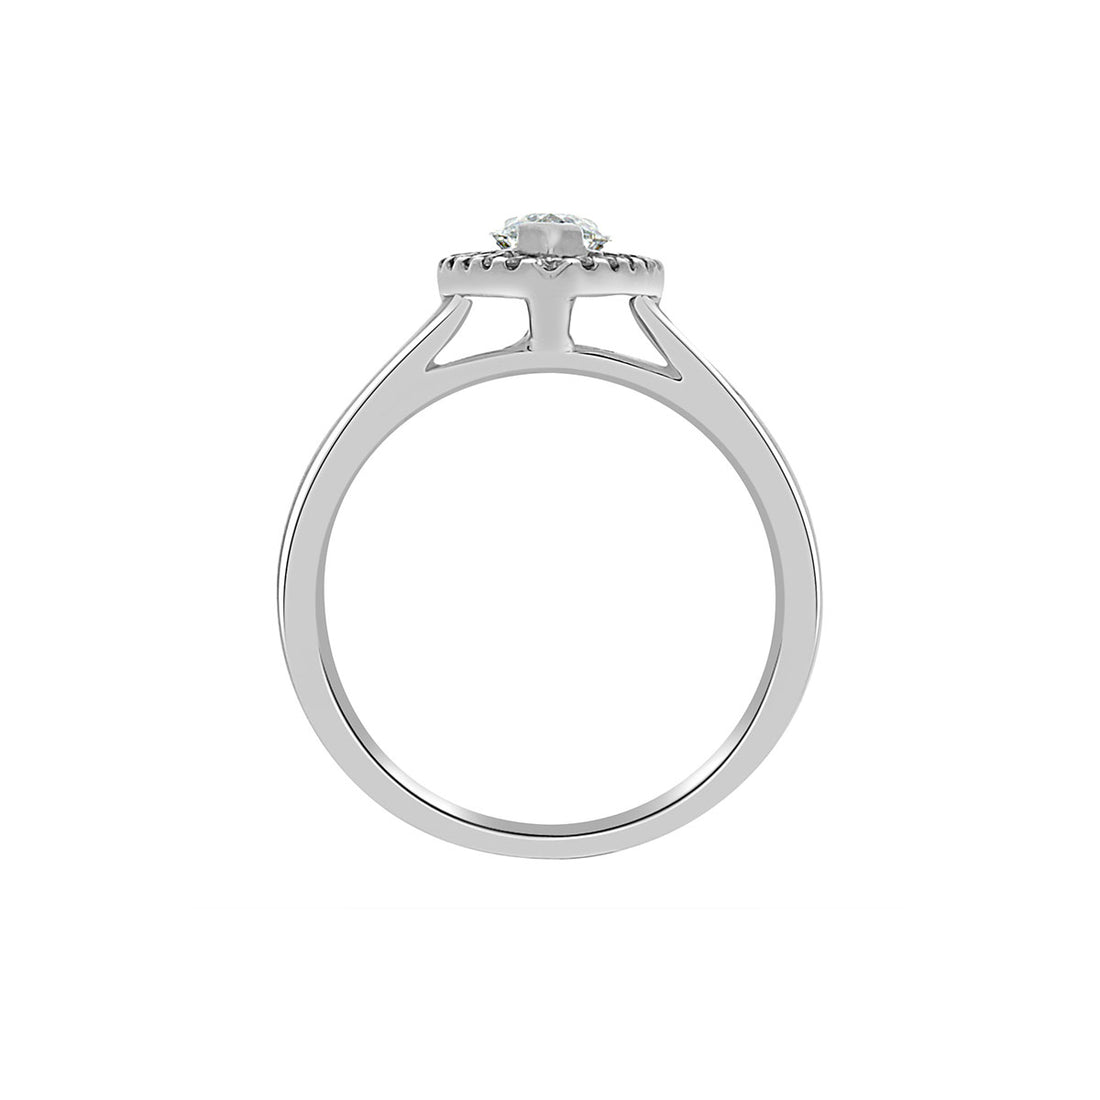 Marquise Cut Halo Ring in platinum in an upright position